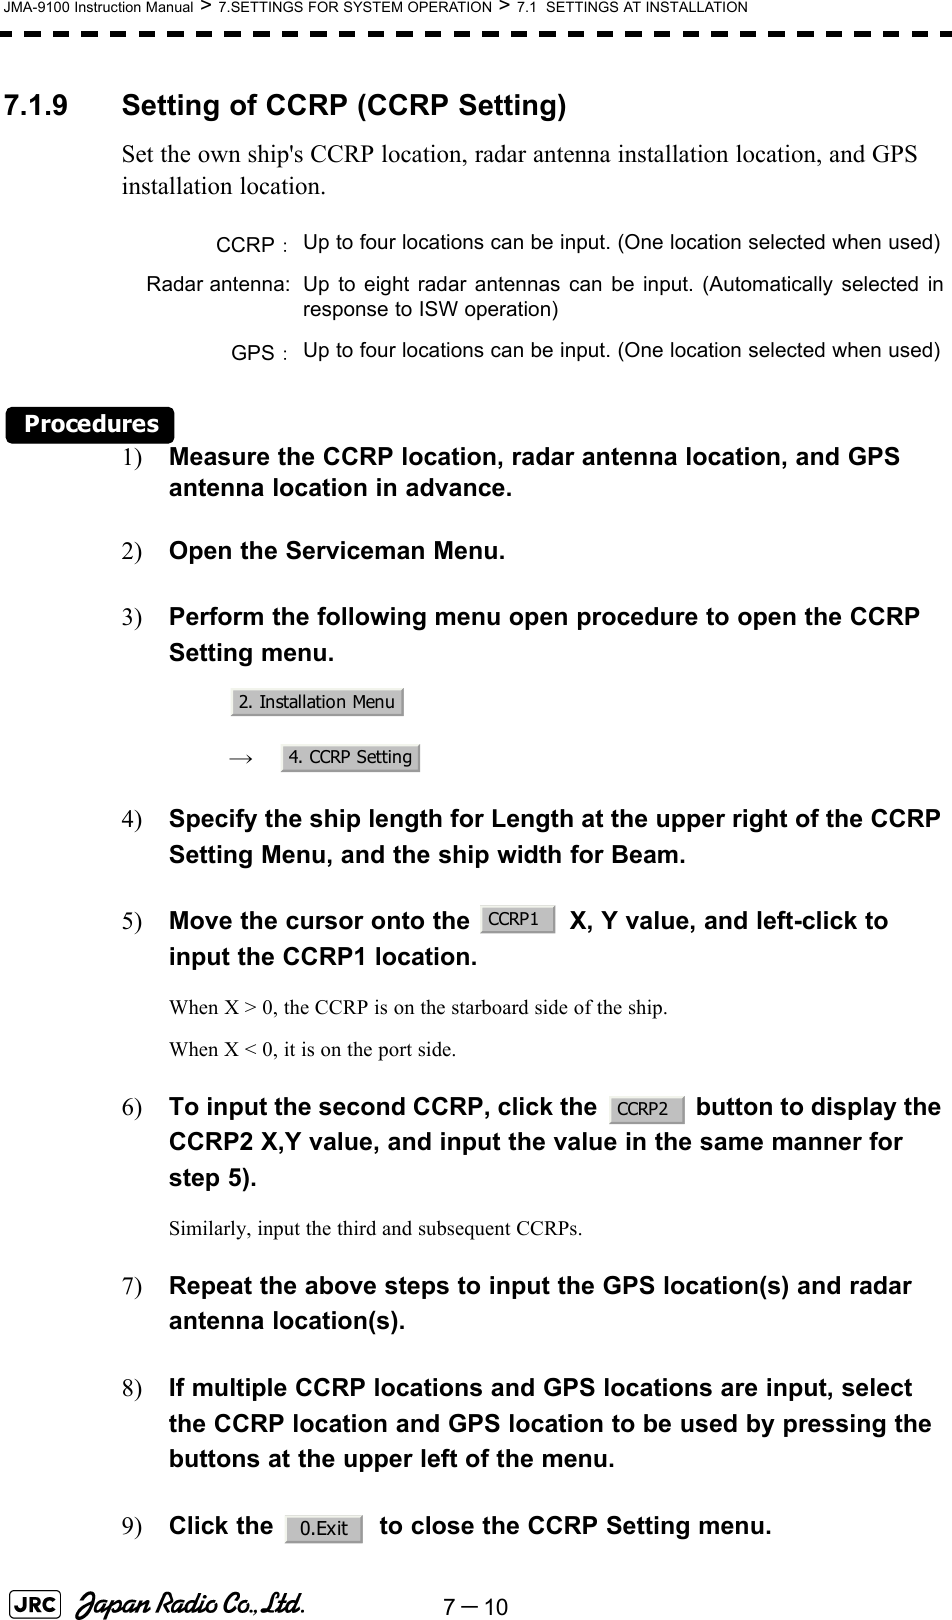 7－10JMA-9100 Instruction Manual &gt; 7.SETTINGS FOR SYSTEM OPERATION &gt; 7.1  SETTINGS AT INSTALLATION7.1.9 Setting of CCRP (CCRP Setting)Set the own ship&apos;s CCRP location, radar antenna installation location, and GPS installation location.Procedures1) Measure the CCRP location, radar antenna location, and GPS antenna location in advance.2) Open the Serviceman Menu.3) Perform the following menu open procedure to open the CCRP Setting menu.　　 →　4) Specify the ship length for Length at the upper right of the CCRP Setting Menu, and the ship width for Beam.5) Move the cursor onto the   X, Y value, and left-click to input the CCRP1 location.When X &gt; 0, the CCRP is on the starboard side of the ship.When X &lt; 0, it is on the port side.6) To input the second CCRP, click the   button to display the CCRP2 X,Y value, and input the value in the same manner for step 5).Similarly, input the third and subsequent CCRPs.7) Repeat the above steps to input the GPS location(s) and radar antenna location(s).8) If multiple CCRP locations and GPS locations are input, select the CCRP location and GPS location to be used by pressing the buttons at the upper left of the menu.9) Click the   to close the CCRP Setting menu.CCRP：Up to four locations can be input. (One location selected when used)Radar antenna: Up to eight radar antennas can be input. (Automatically selected inresponse to ISW operation)GPS：Up to four locations can be input. (One location selected when used)2. Installation Menu4. CCRP SettingCCRP1CCRP20.Exit